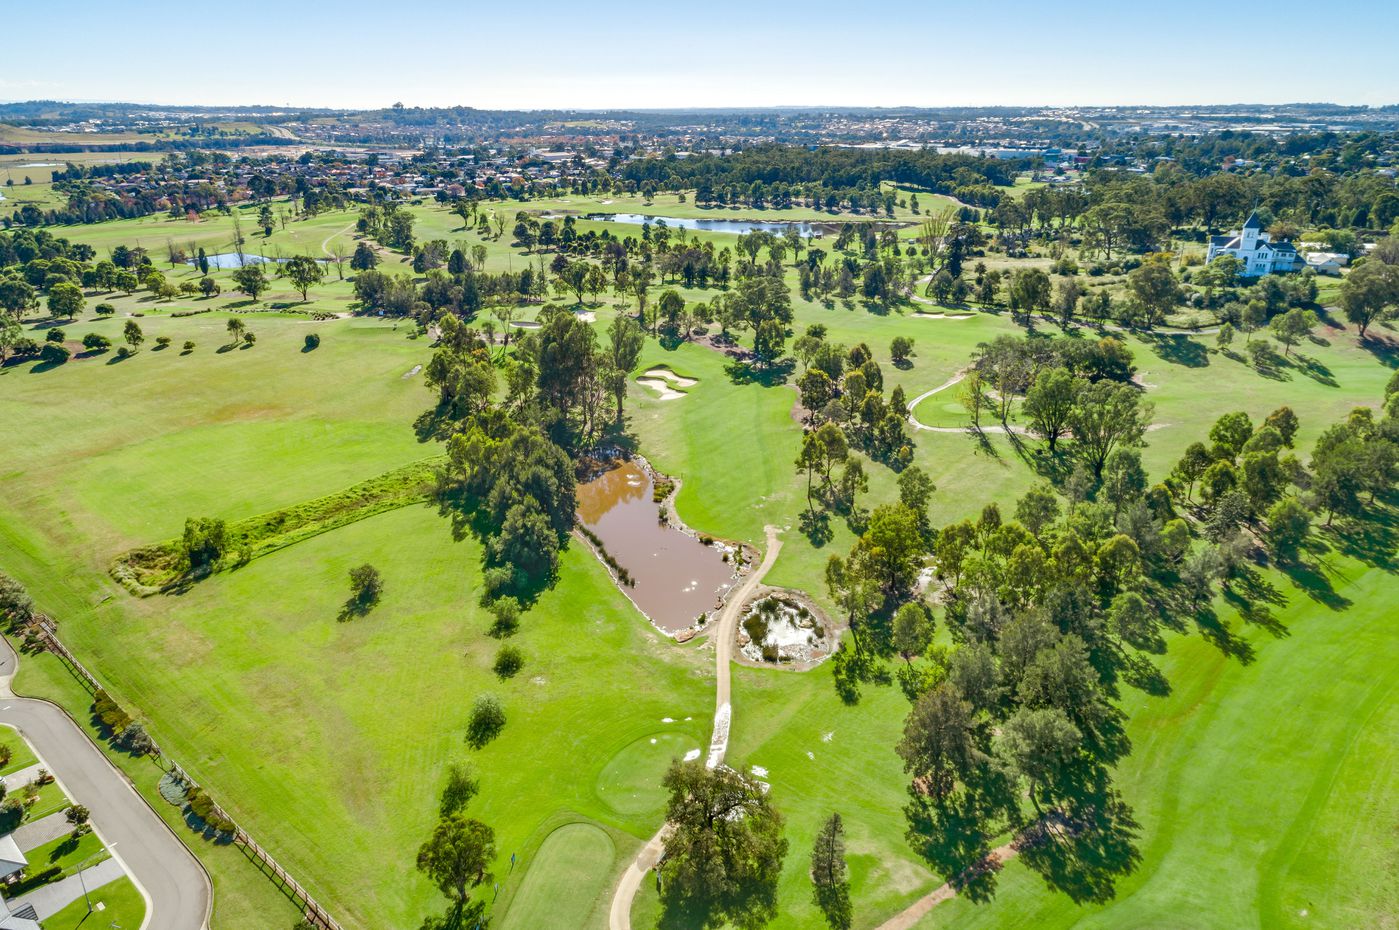  Discover the latest real estate listings and houses for sale in Elderslie NSW with             McLaren Real Estate 